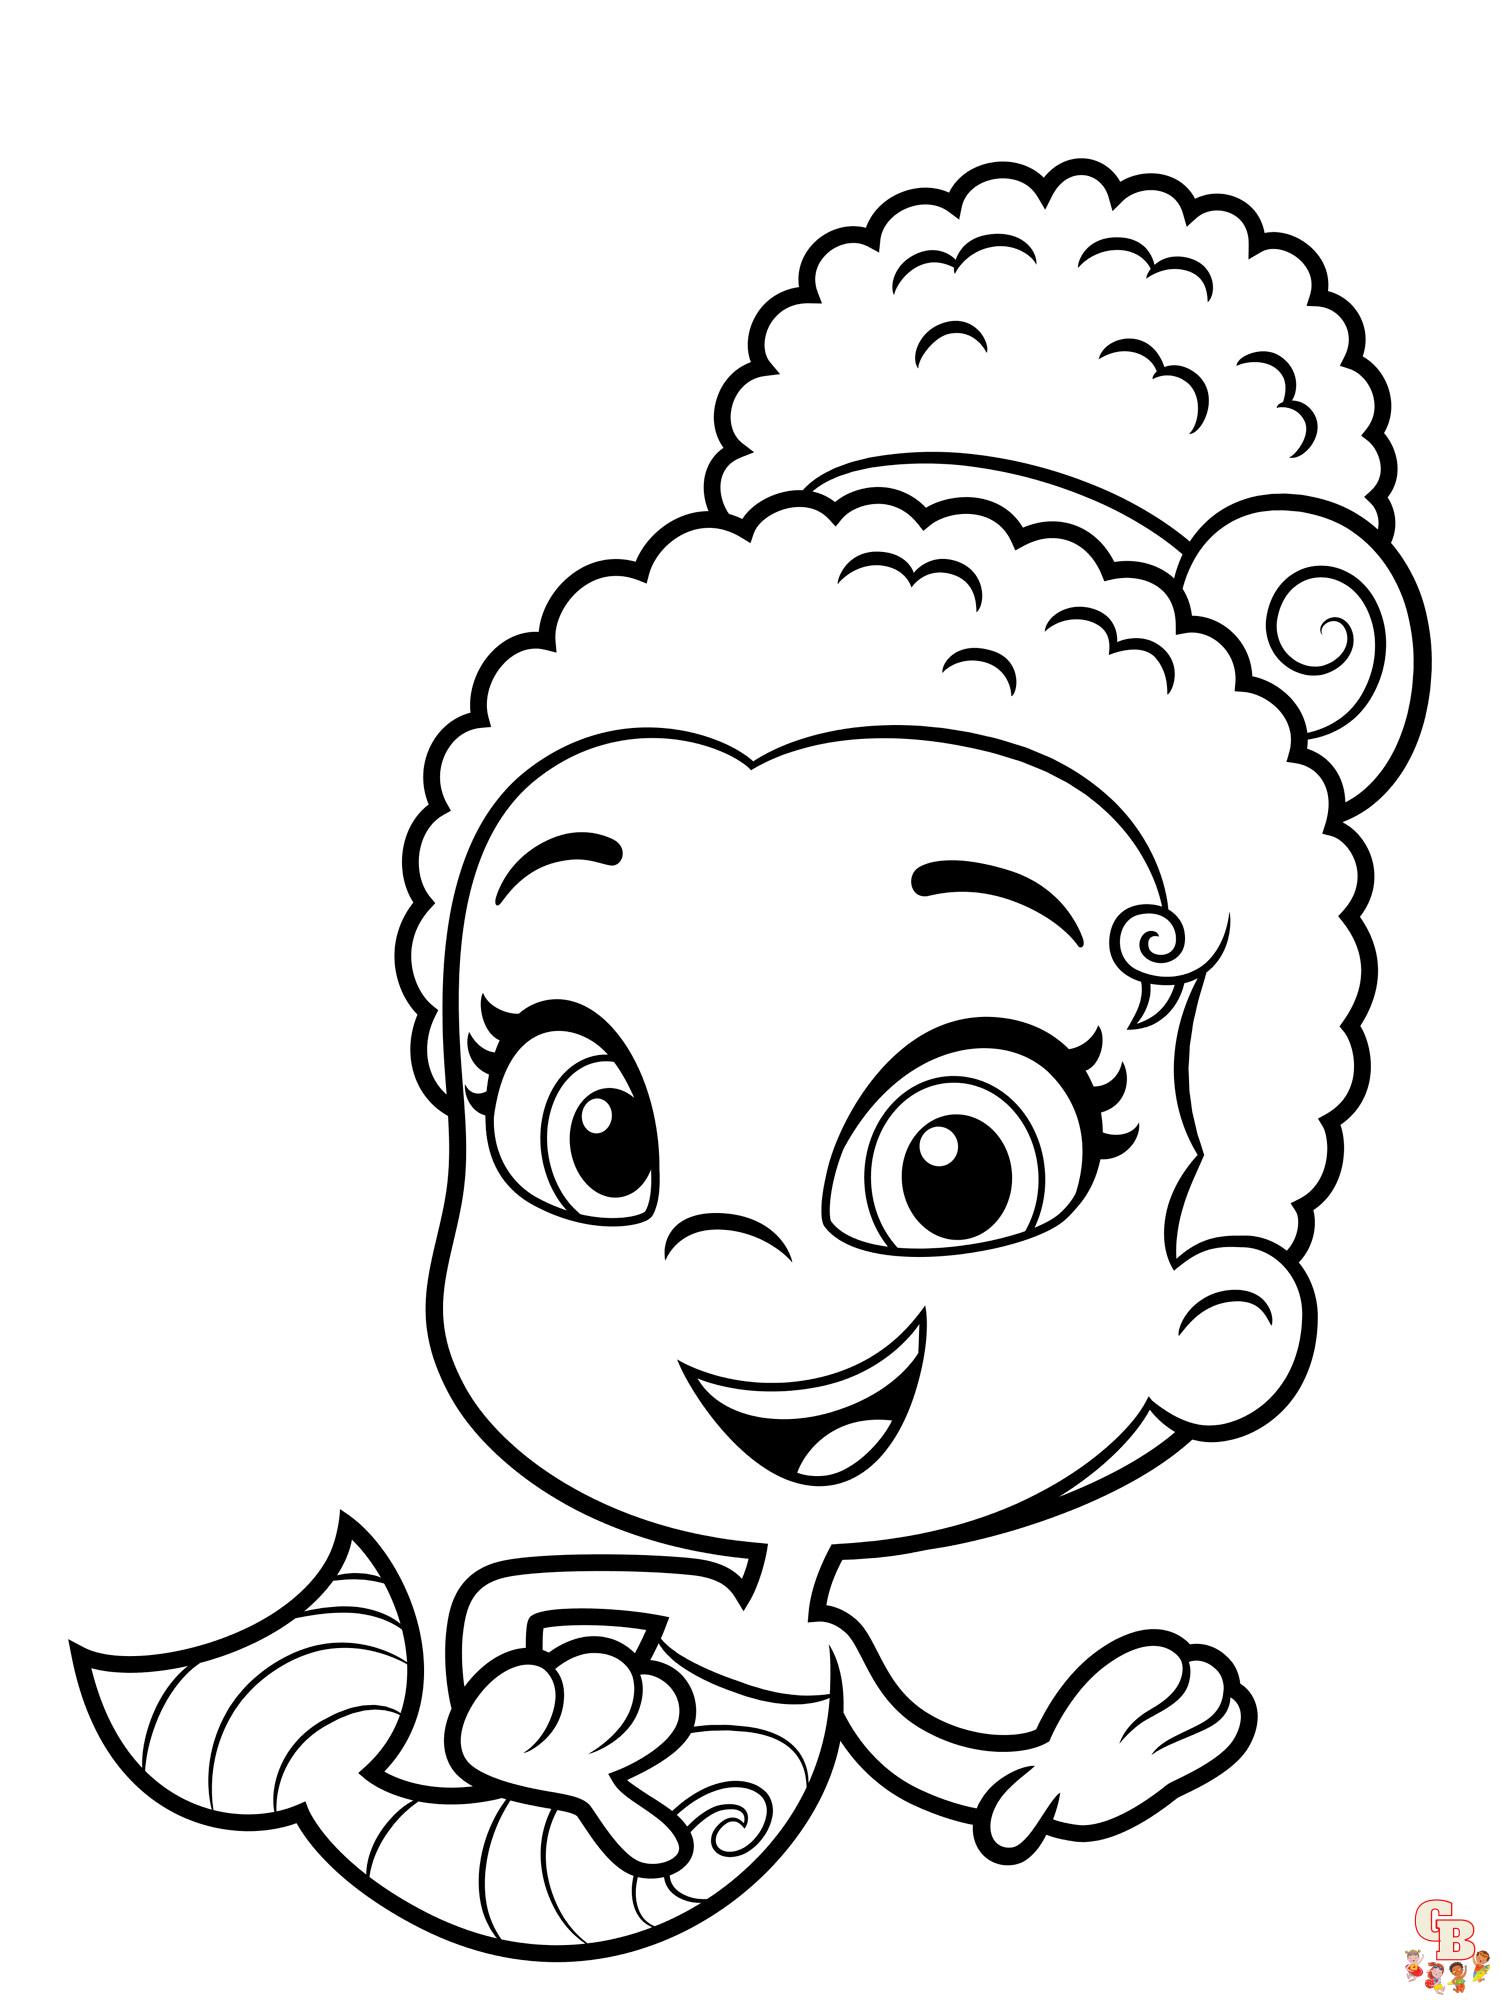 Bubble Guppies Coloring Pages 15